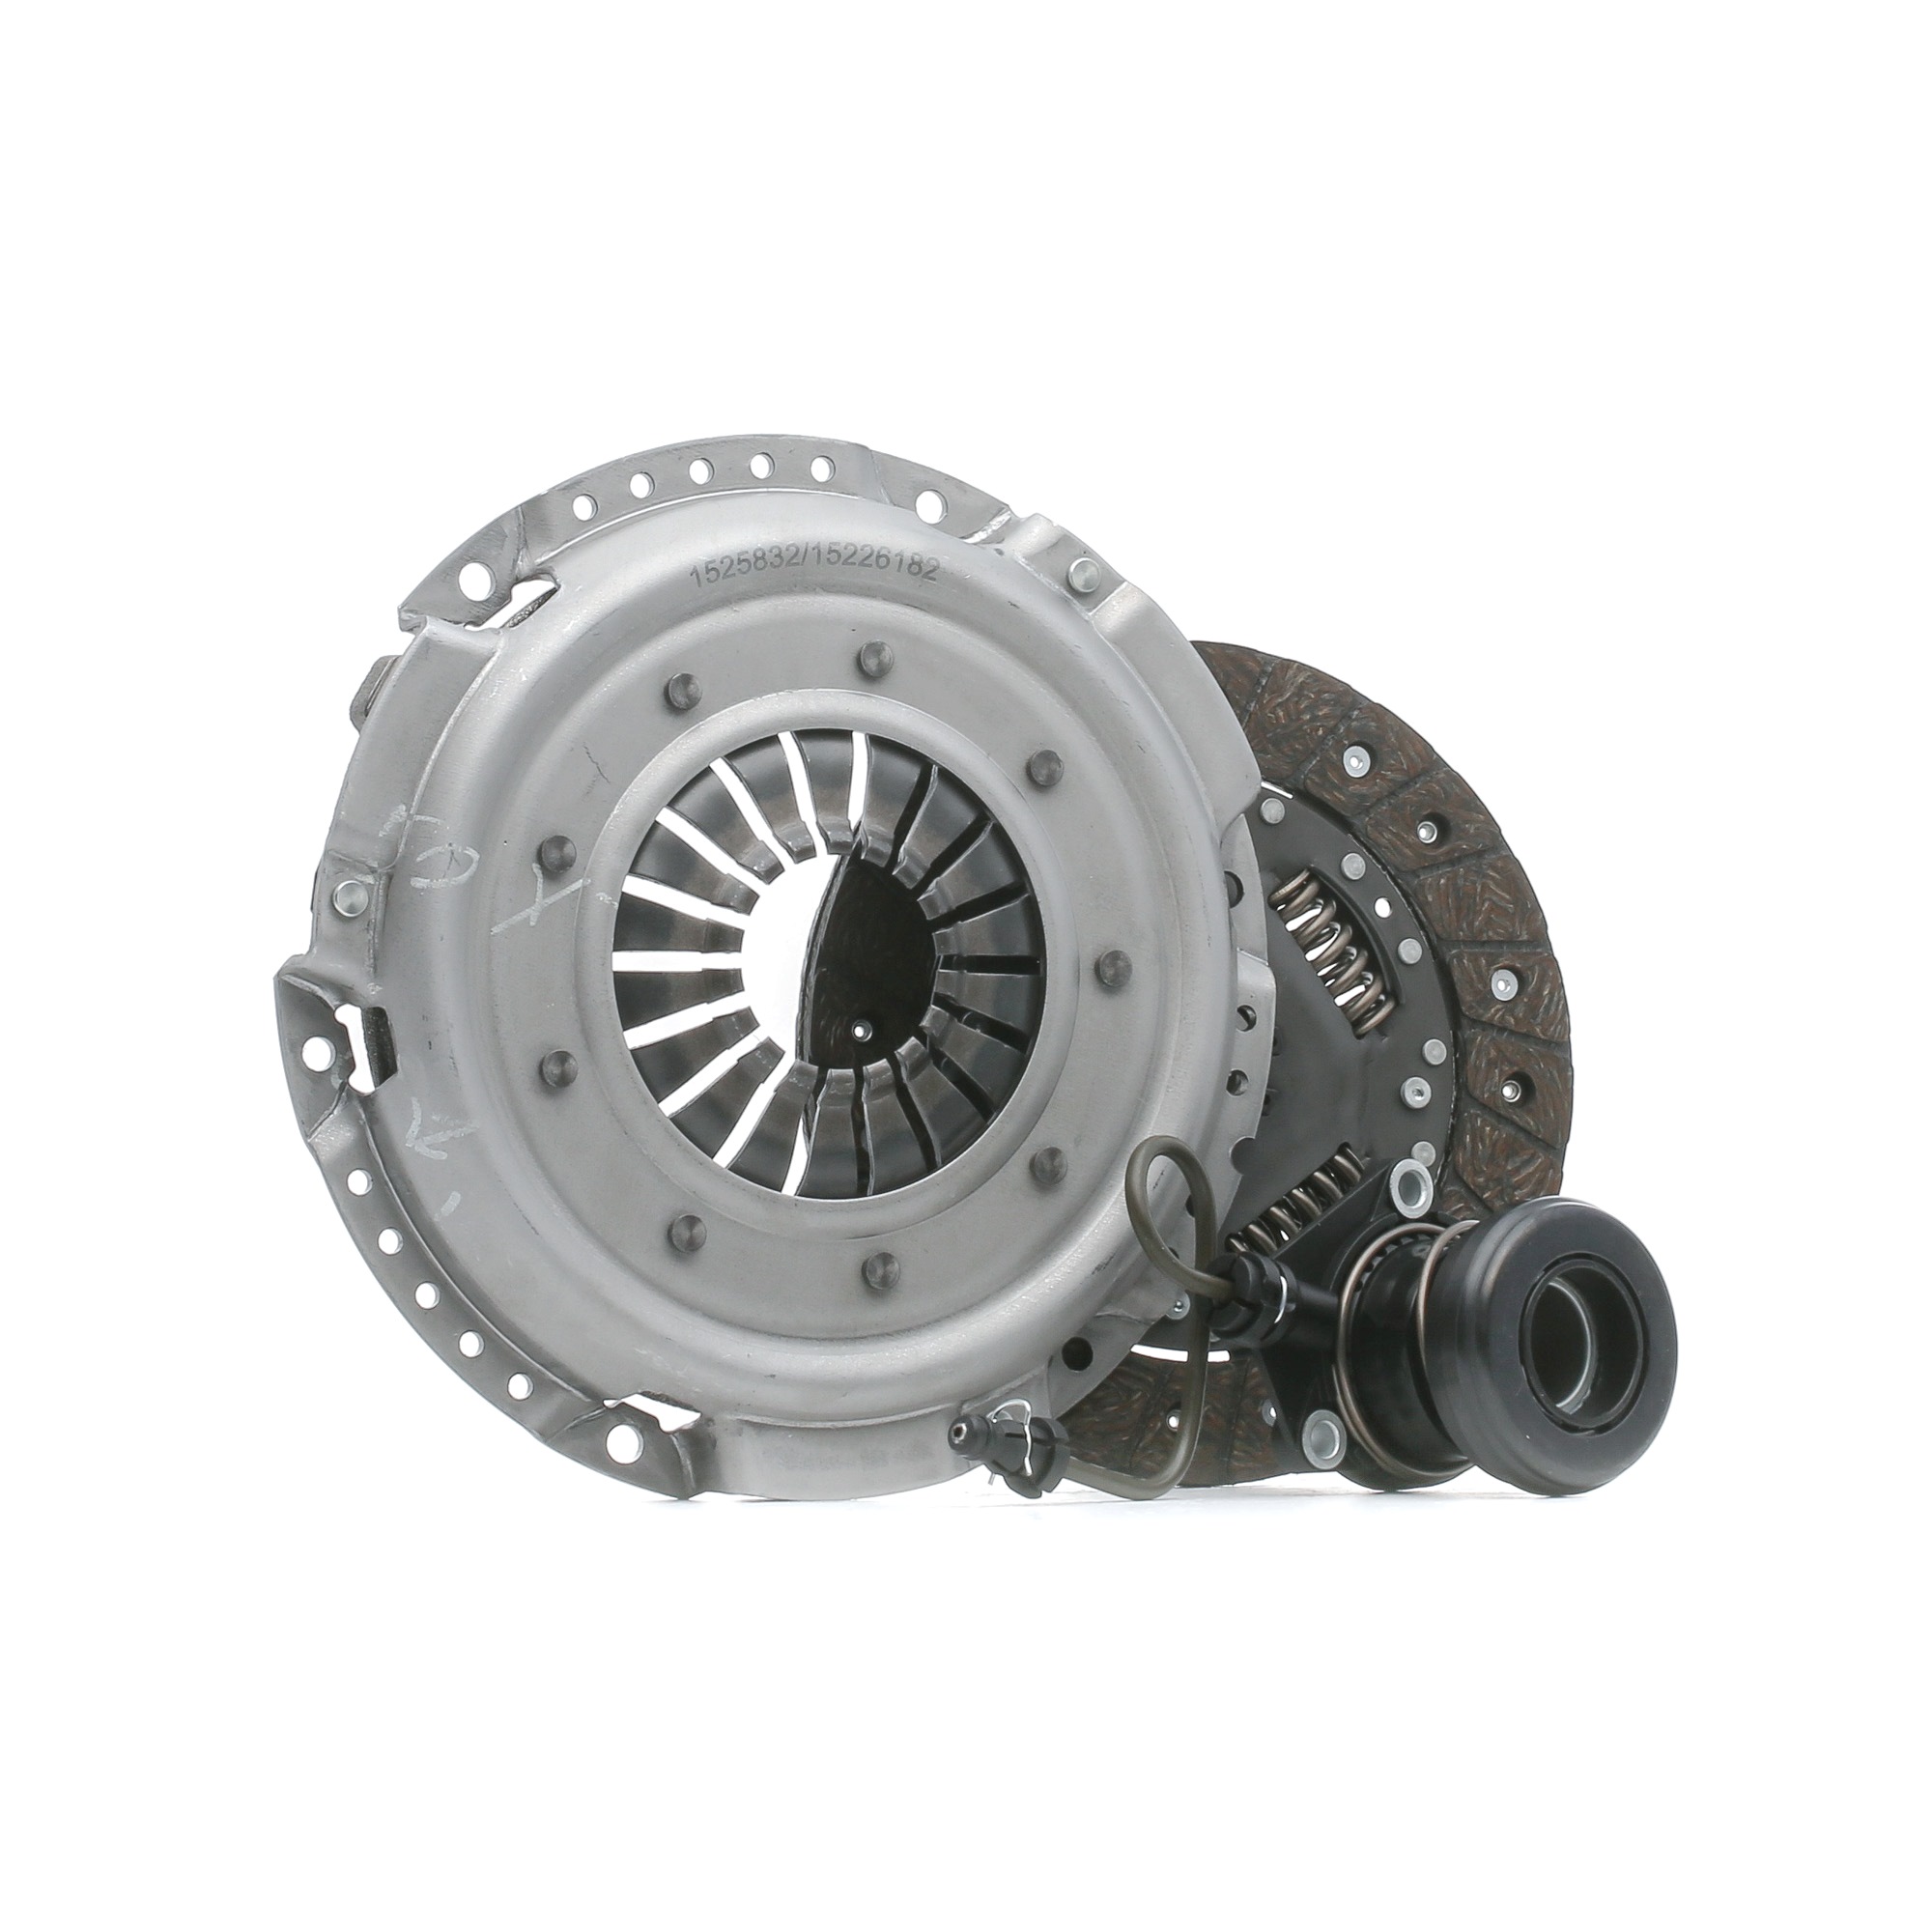 RIDEX 479C0482 OPEL CORSA 2001 Clutch replacement kit